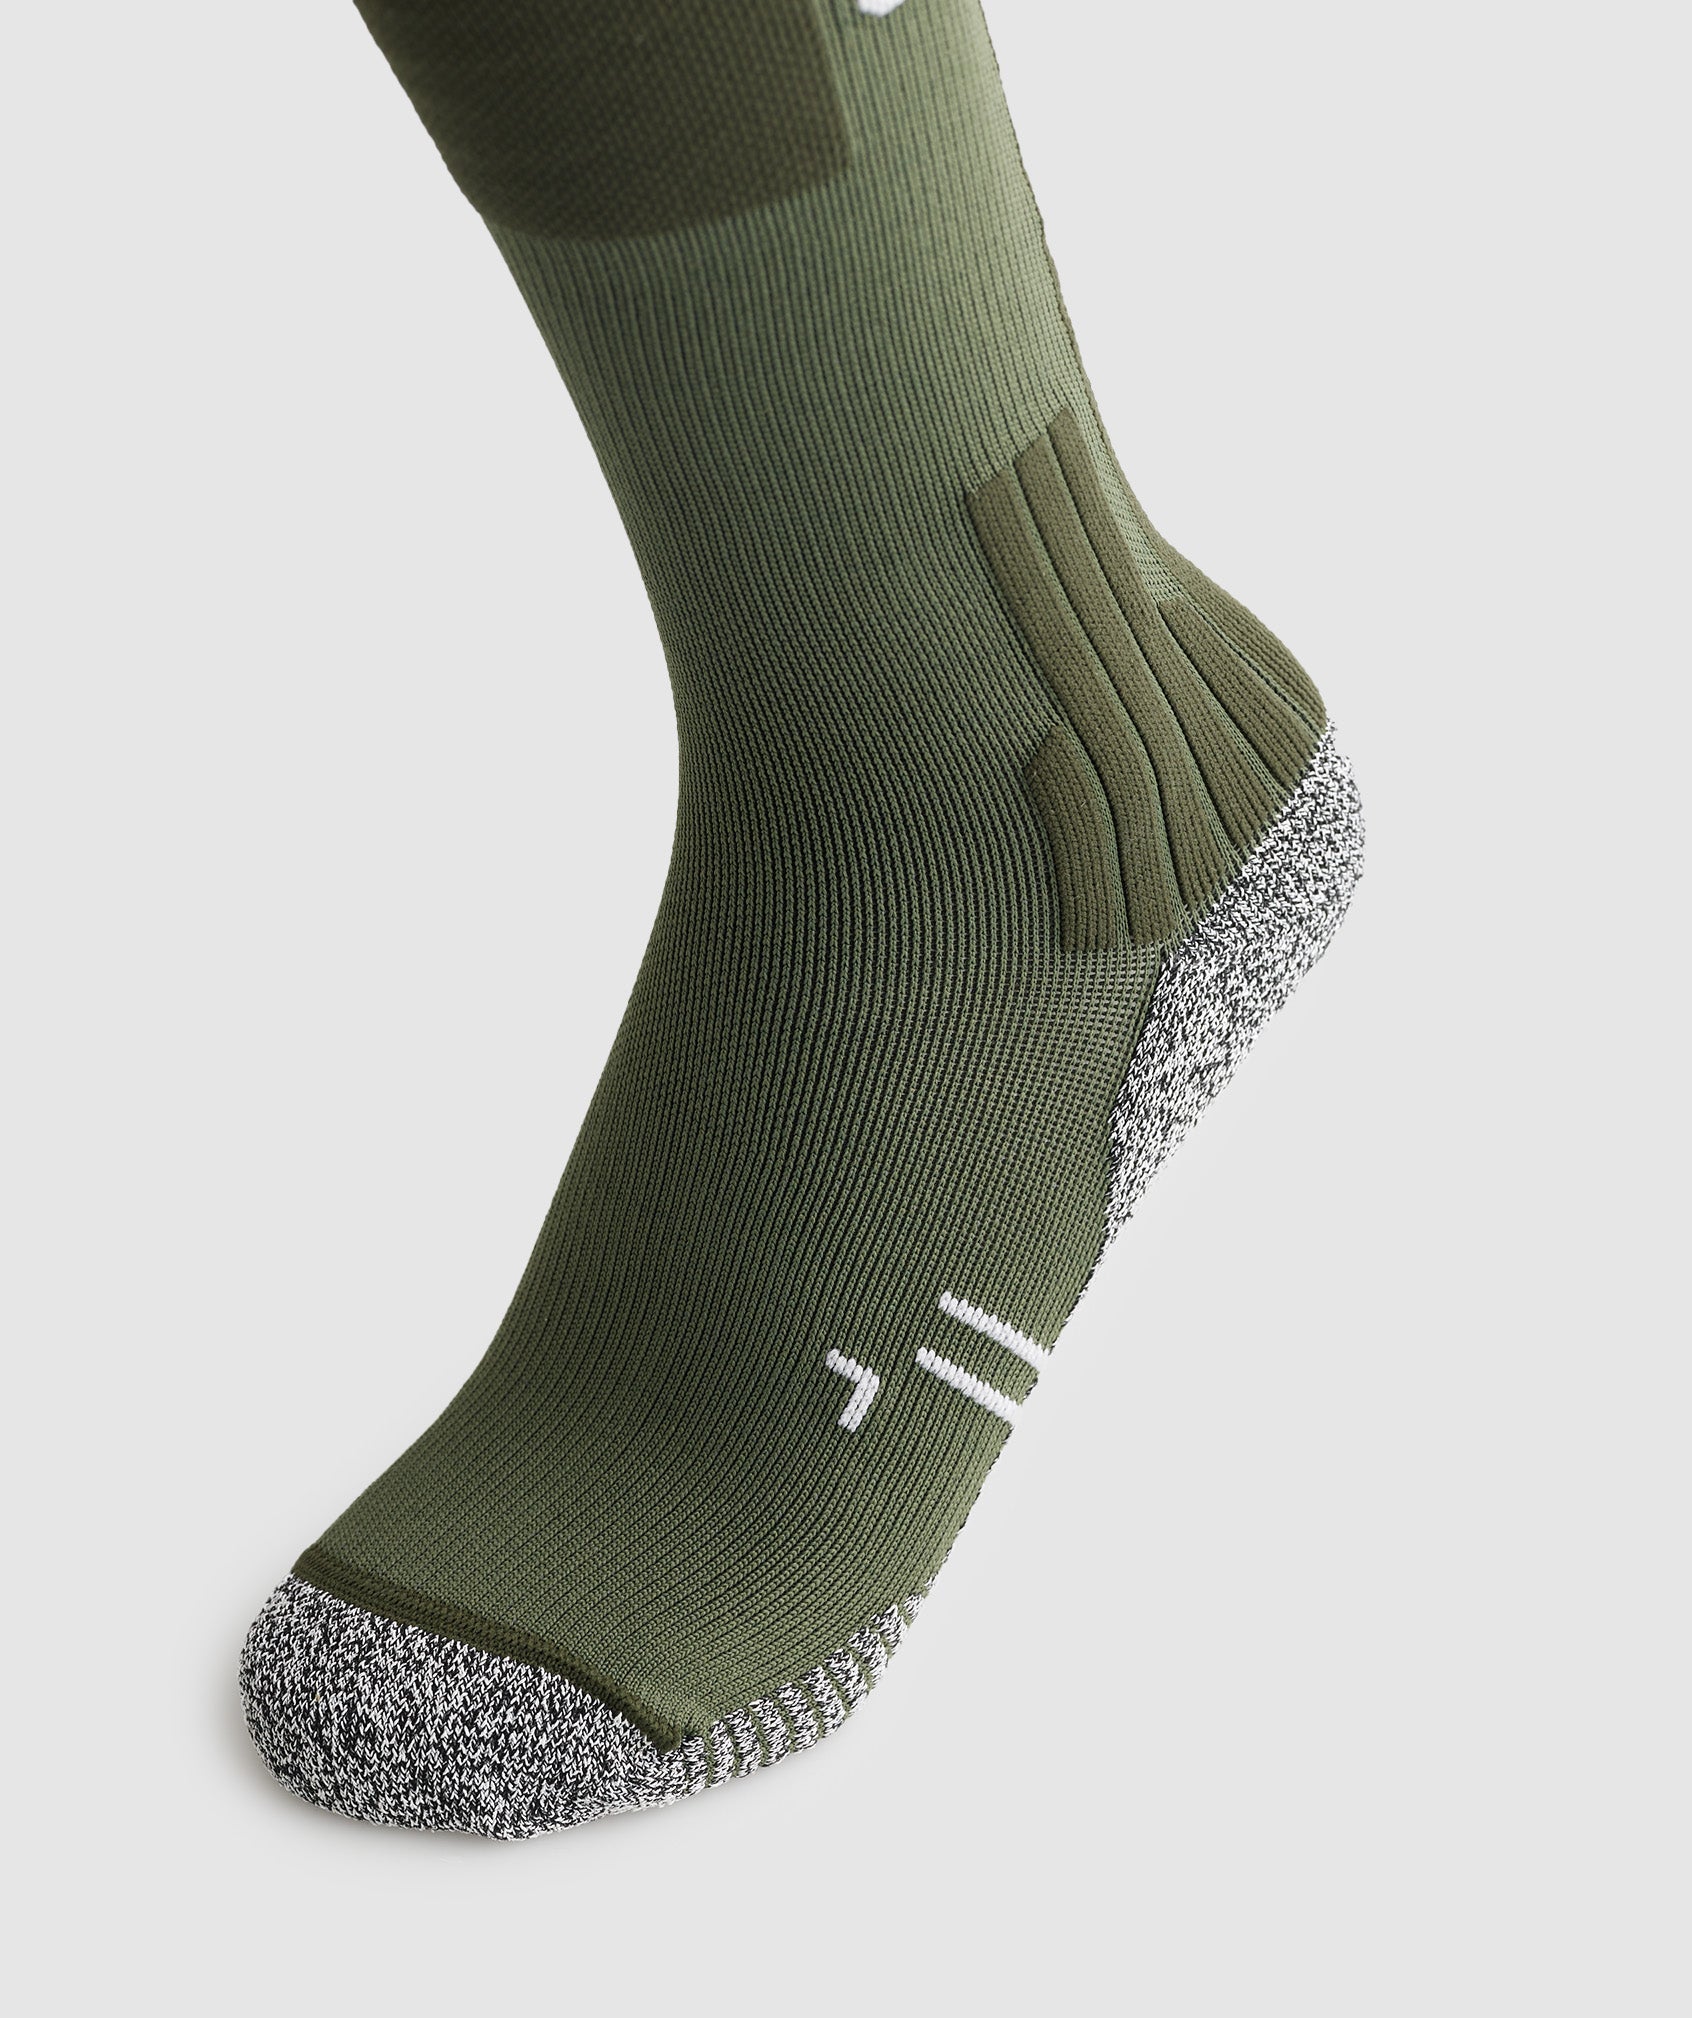 Weightlifting Sock in Olive Green - view 2